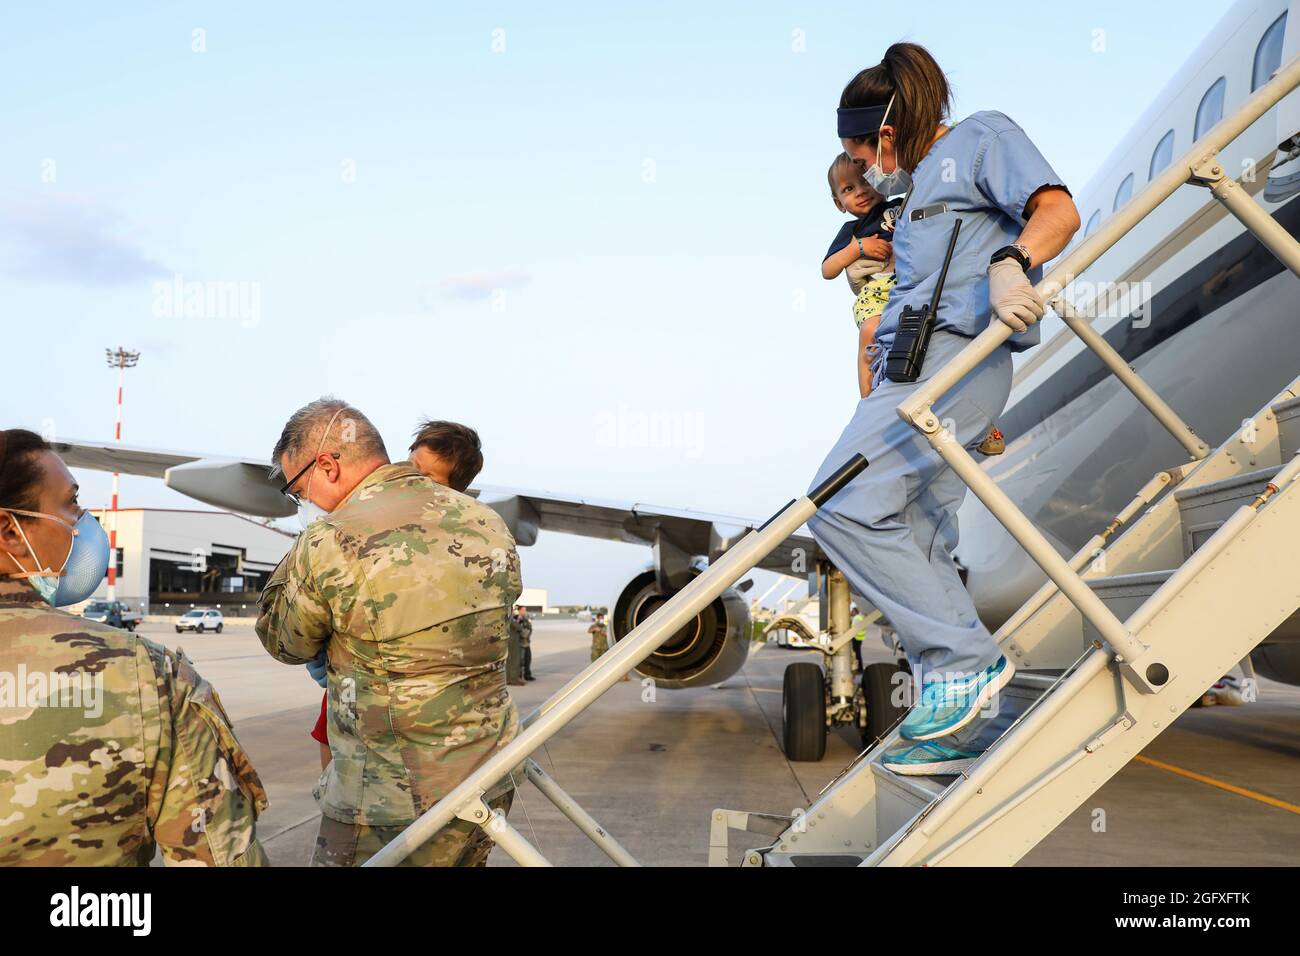 NAVAL AIR STATION SIGONELLA, Italy (Aug. 26, 2021) – U.S. Service members help Afghanistan evacuees depart a U.S. Air Force C-40B Clipper at Naval Air Station Sigonella Aug. 26, 2021. NAS Sigonella is currently supporting the Department of Defense mission to facilitate the safe departure and relocation of U.S. citizens, Special Immigration Visa recipients, and vulnerable Afghan populations from Afghanistan. NAS Sigonella’s strategic location enables U.S, allied, and partner nation forces to deploy and respond as required to ensure security and stability in Europe, Africa, and Central Command. Stock Photo